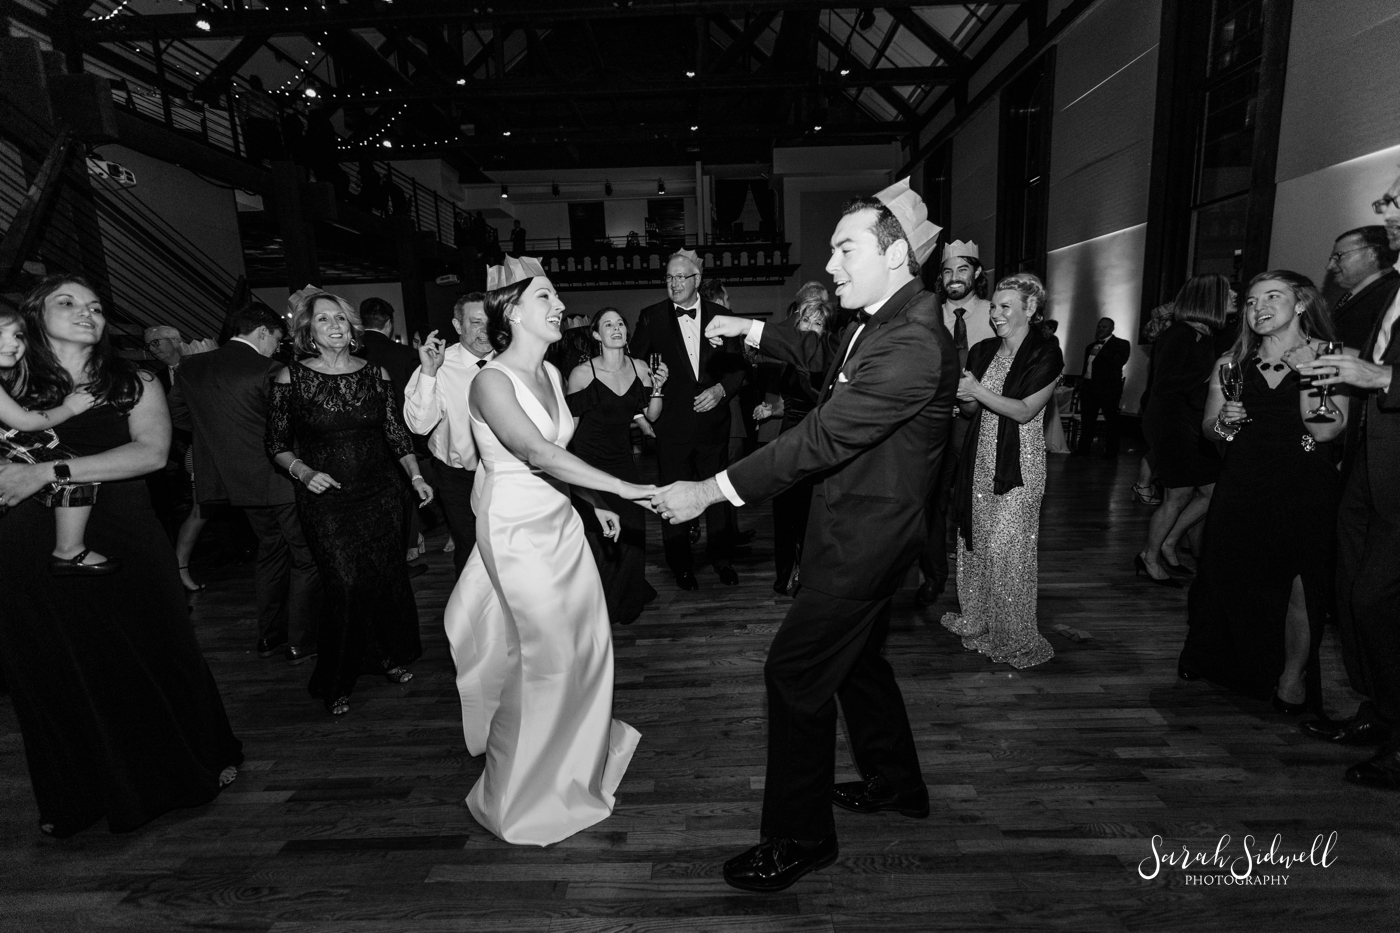 Two people dance at a wedding | Sarah Sidwell Photography | The Bell Tower